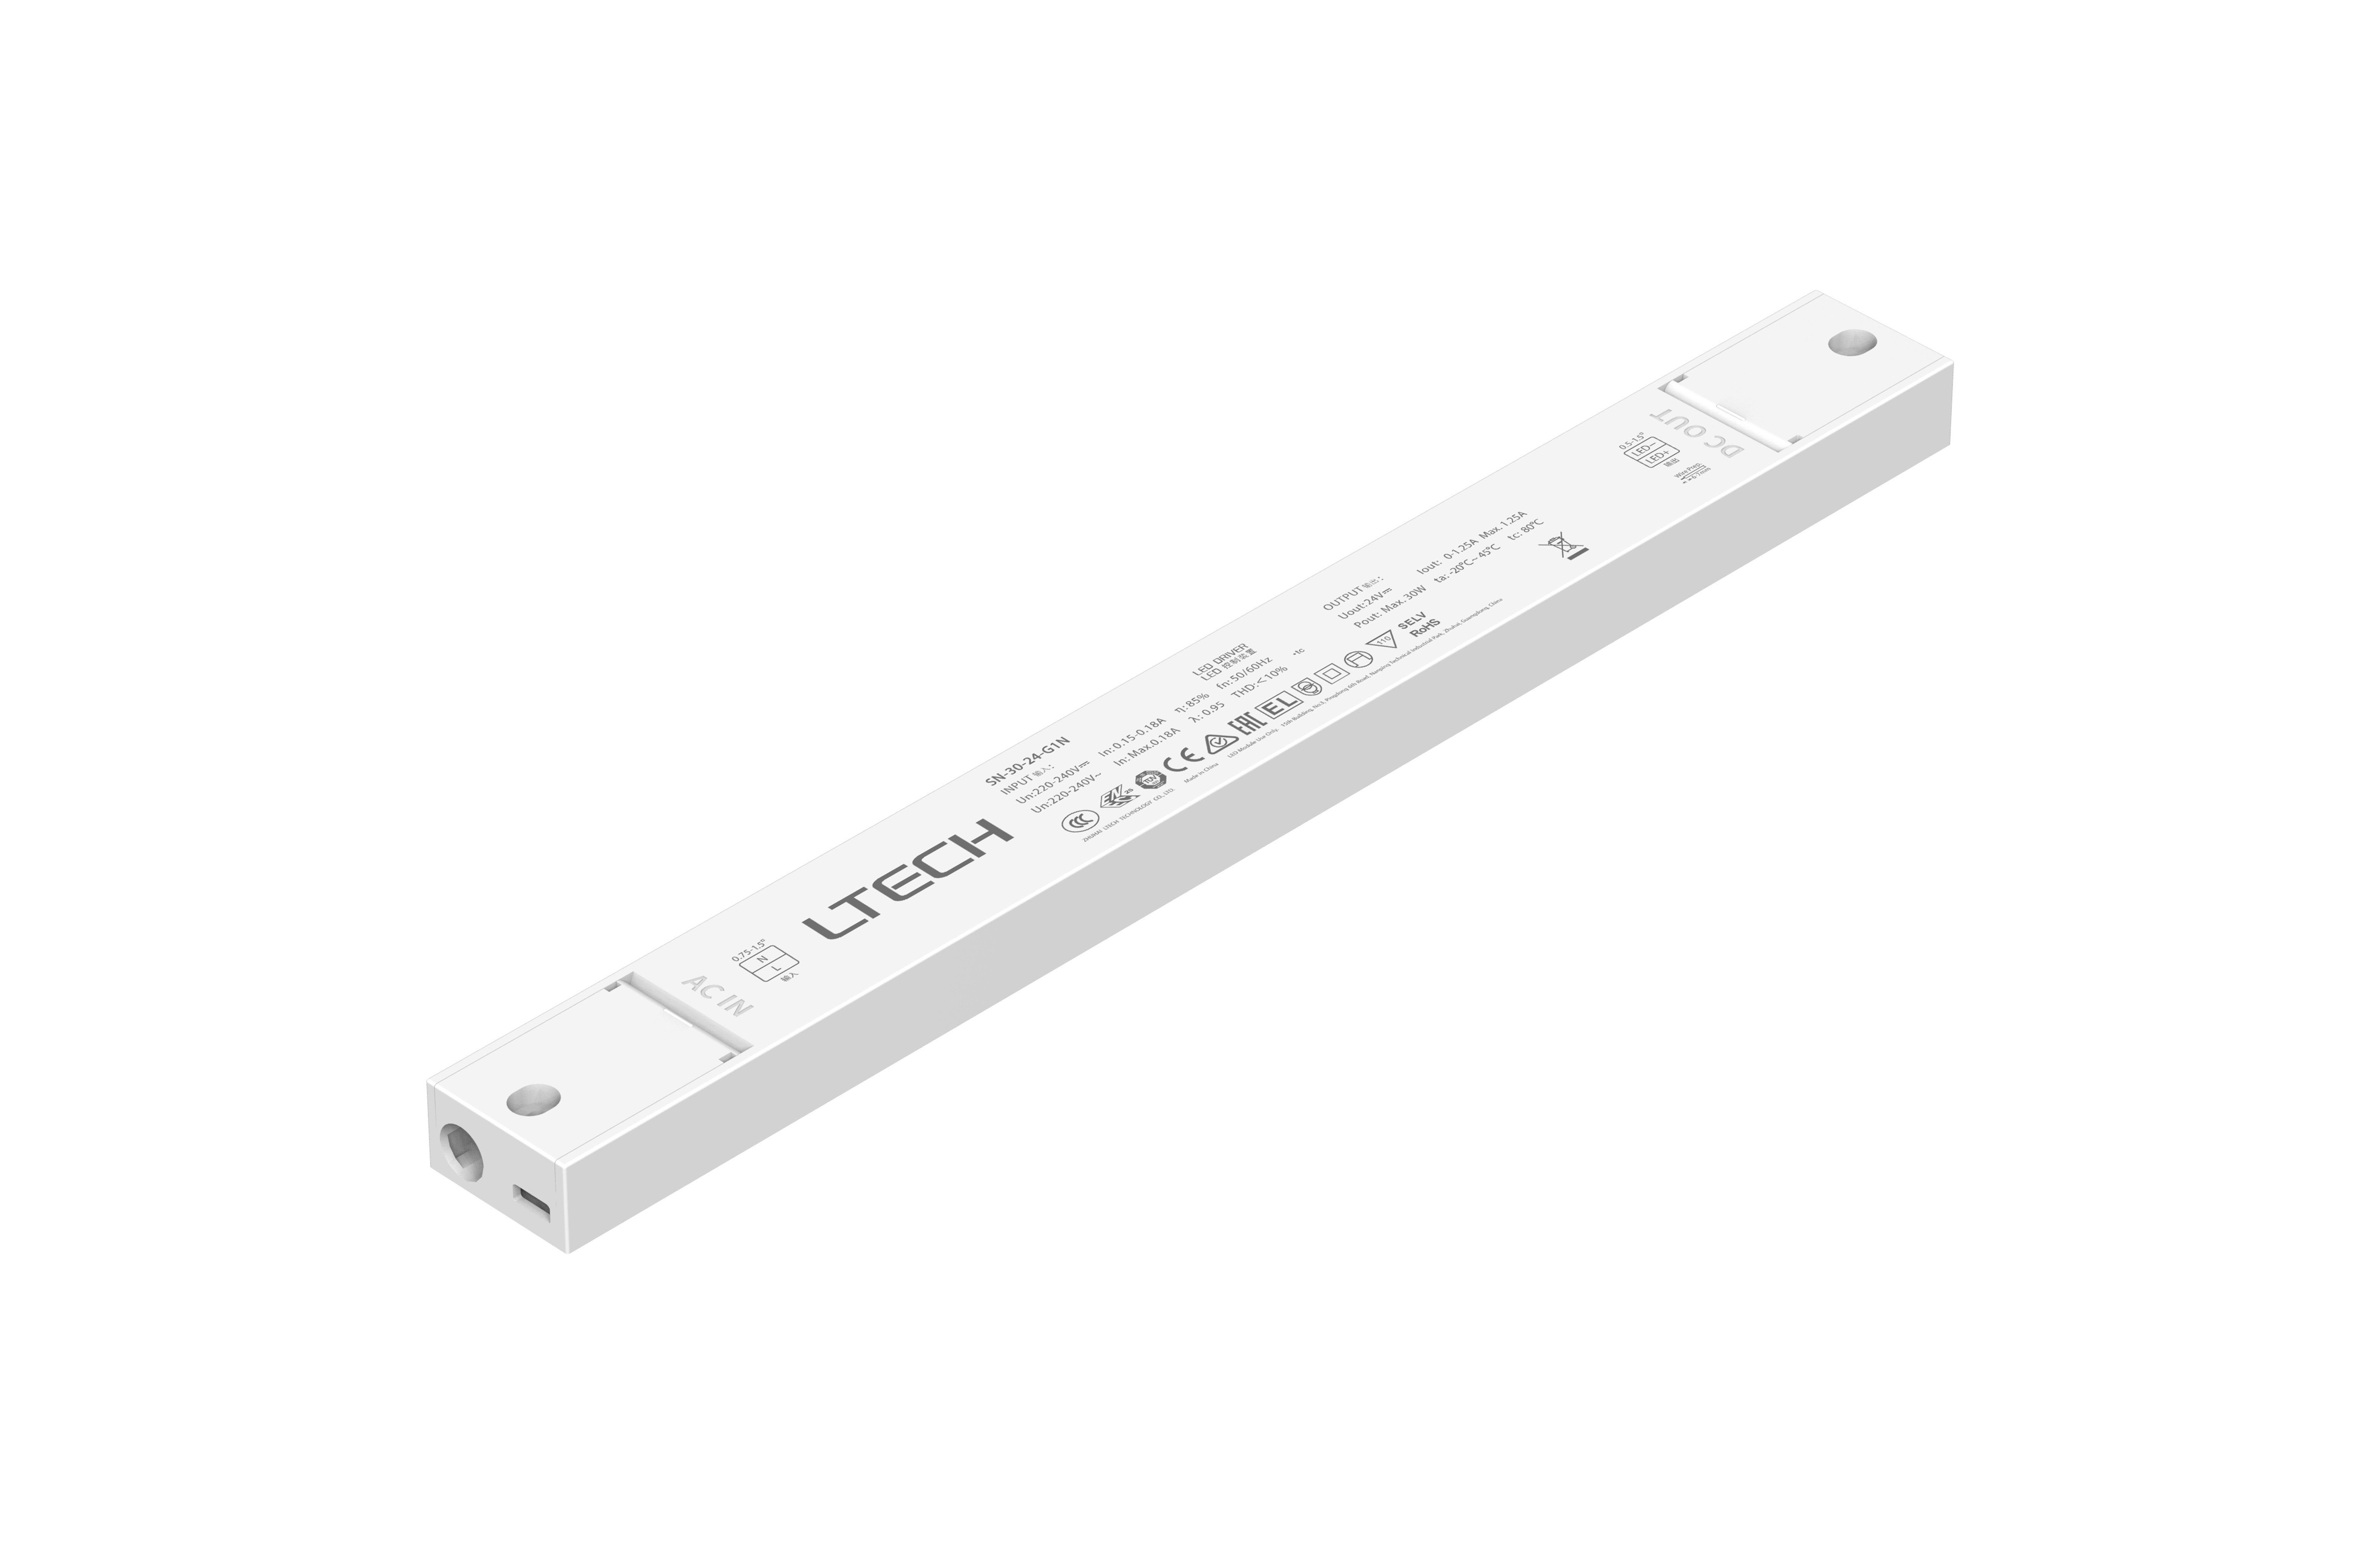 SN-30-24-G1NF-NFC  Intelligent Constant Current NFC ON/OFF LED Driver;  30W; 24VDC 1.25A ; 220-240Vac; IP20; 5yrs Warrenty.